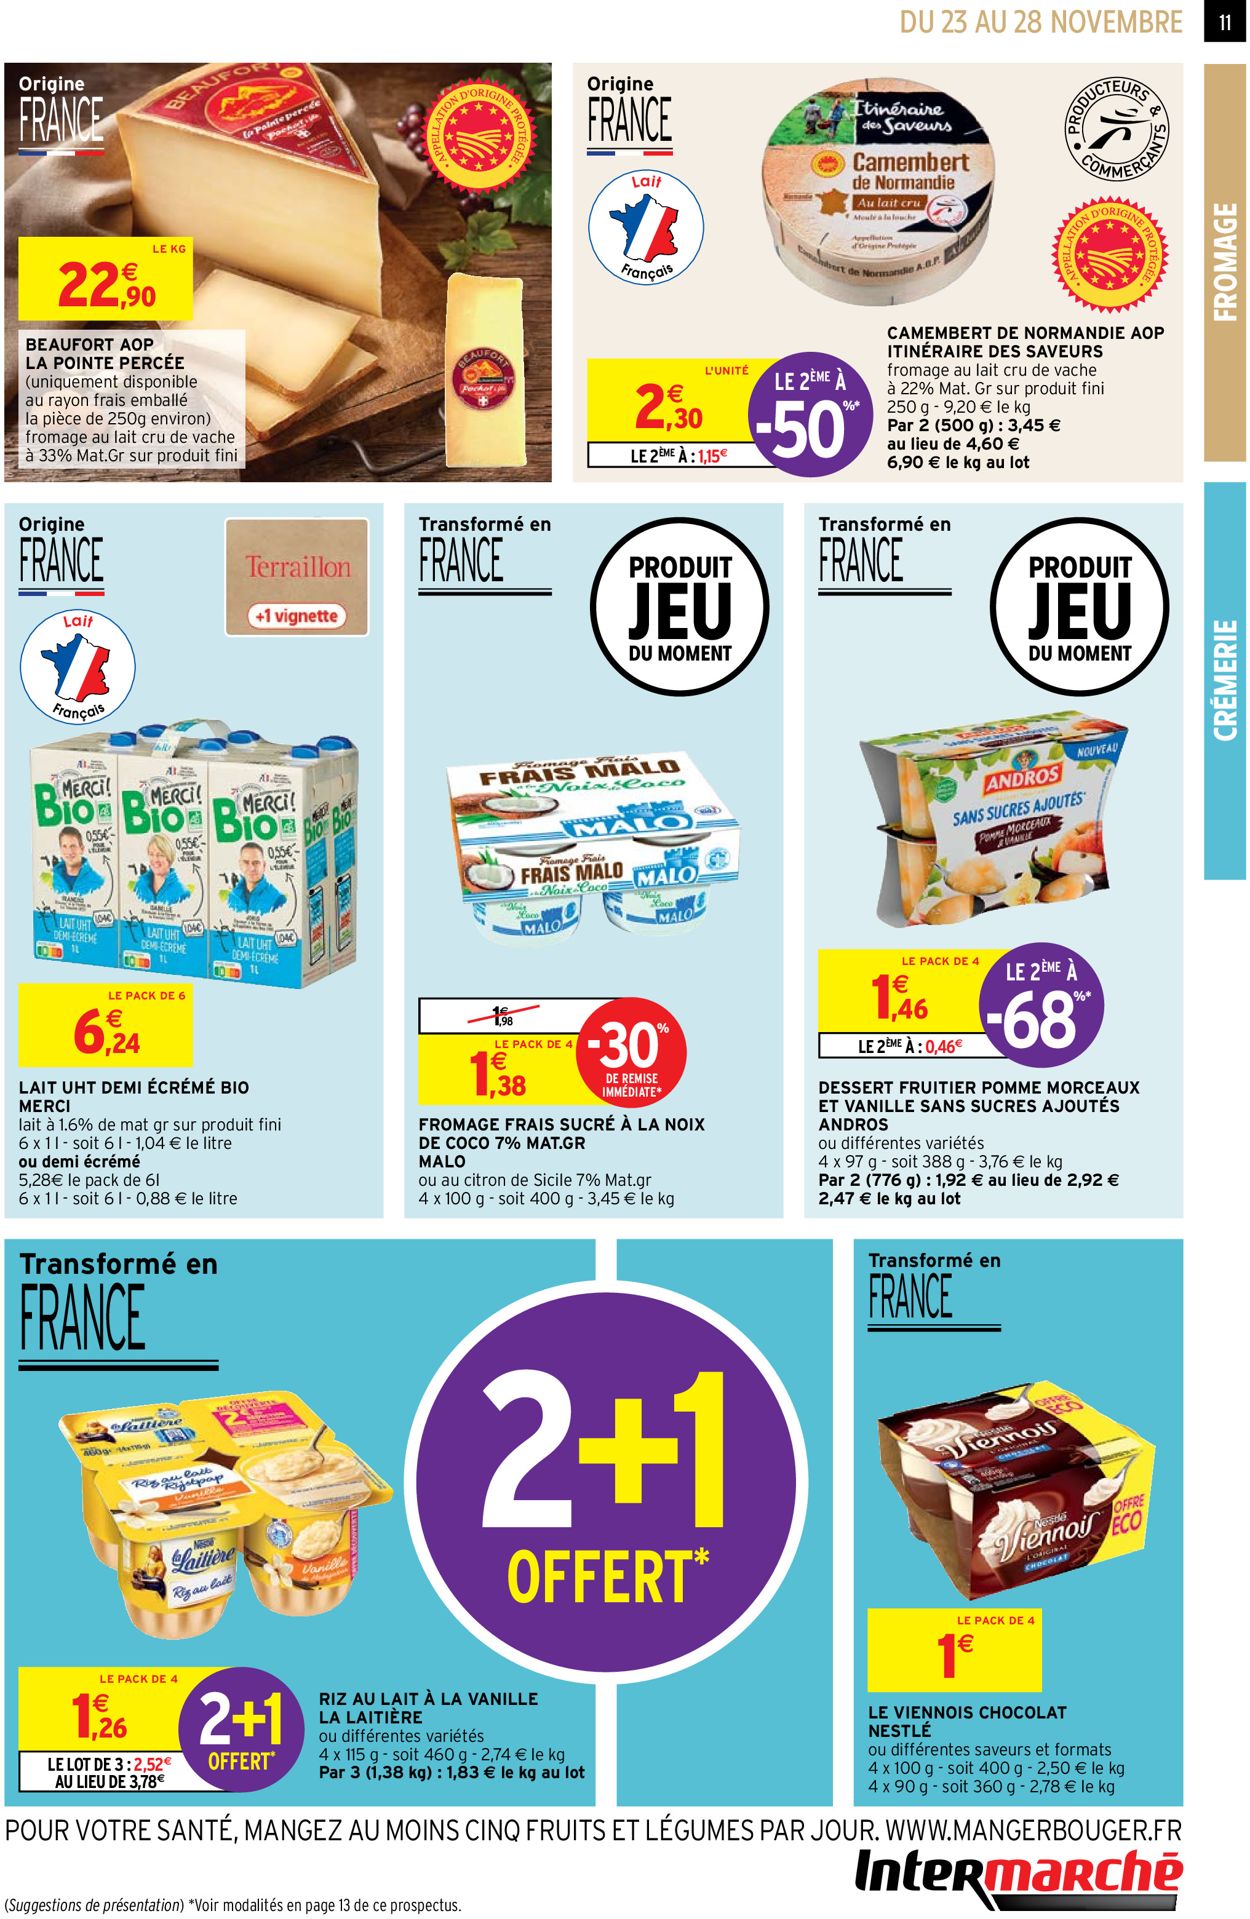 Intermarché  BLACK WEEK 2021 Catalogue - 23.11-28.11.2021 (Page 11)